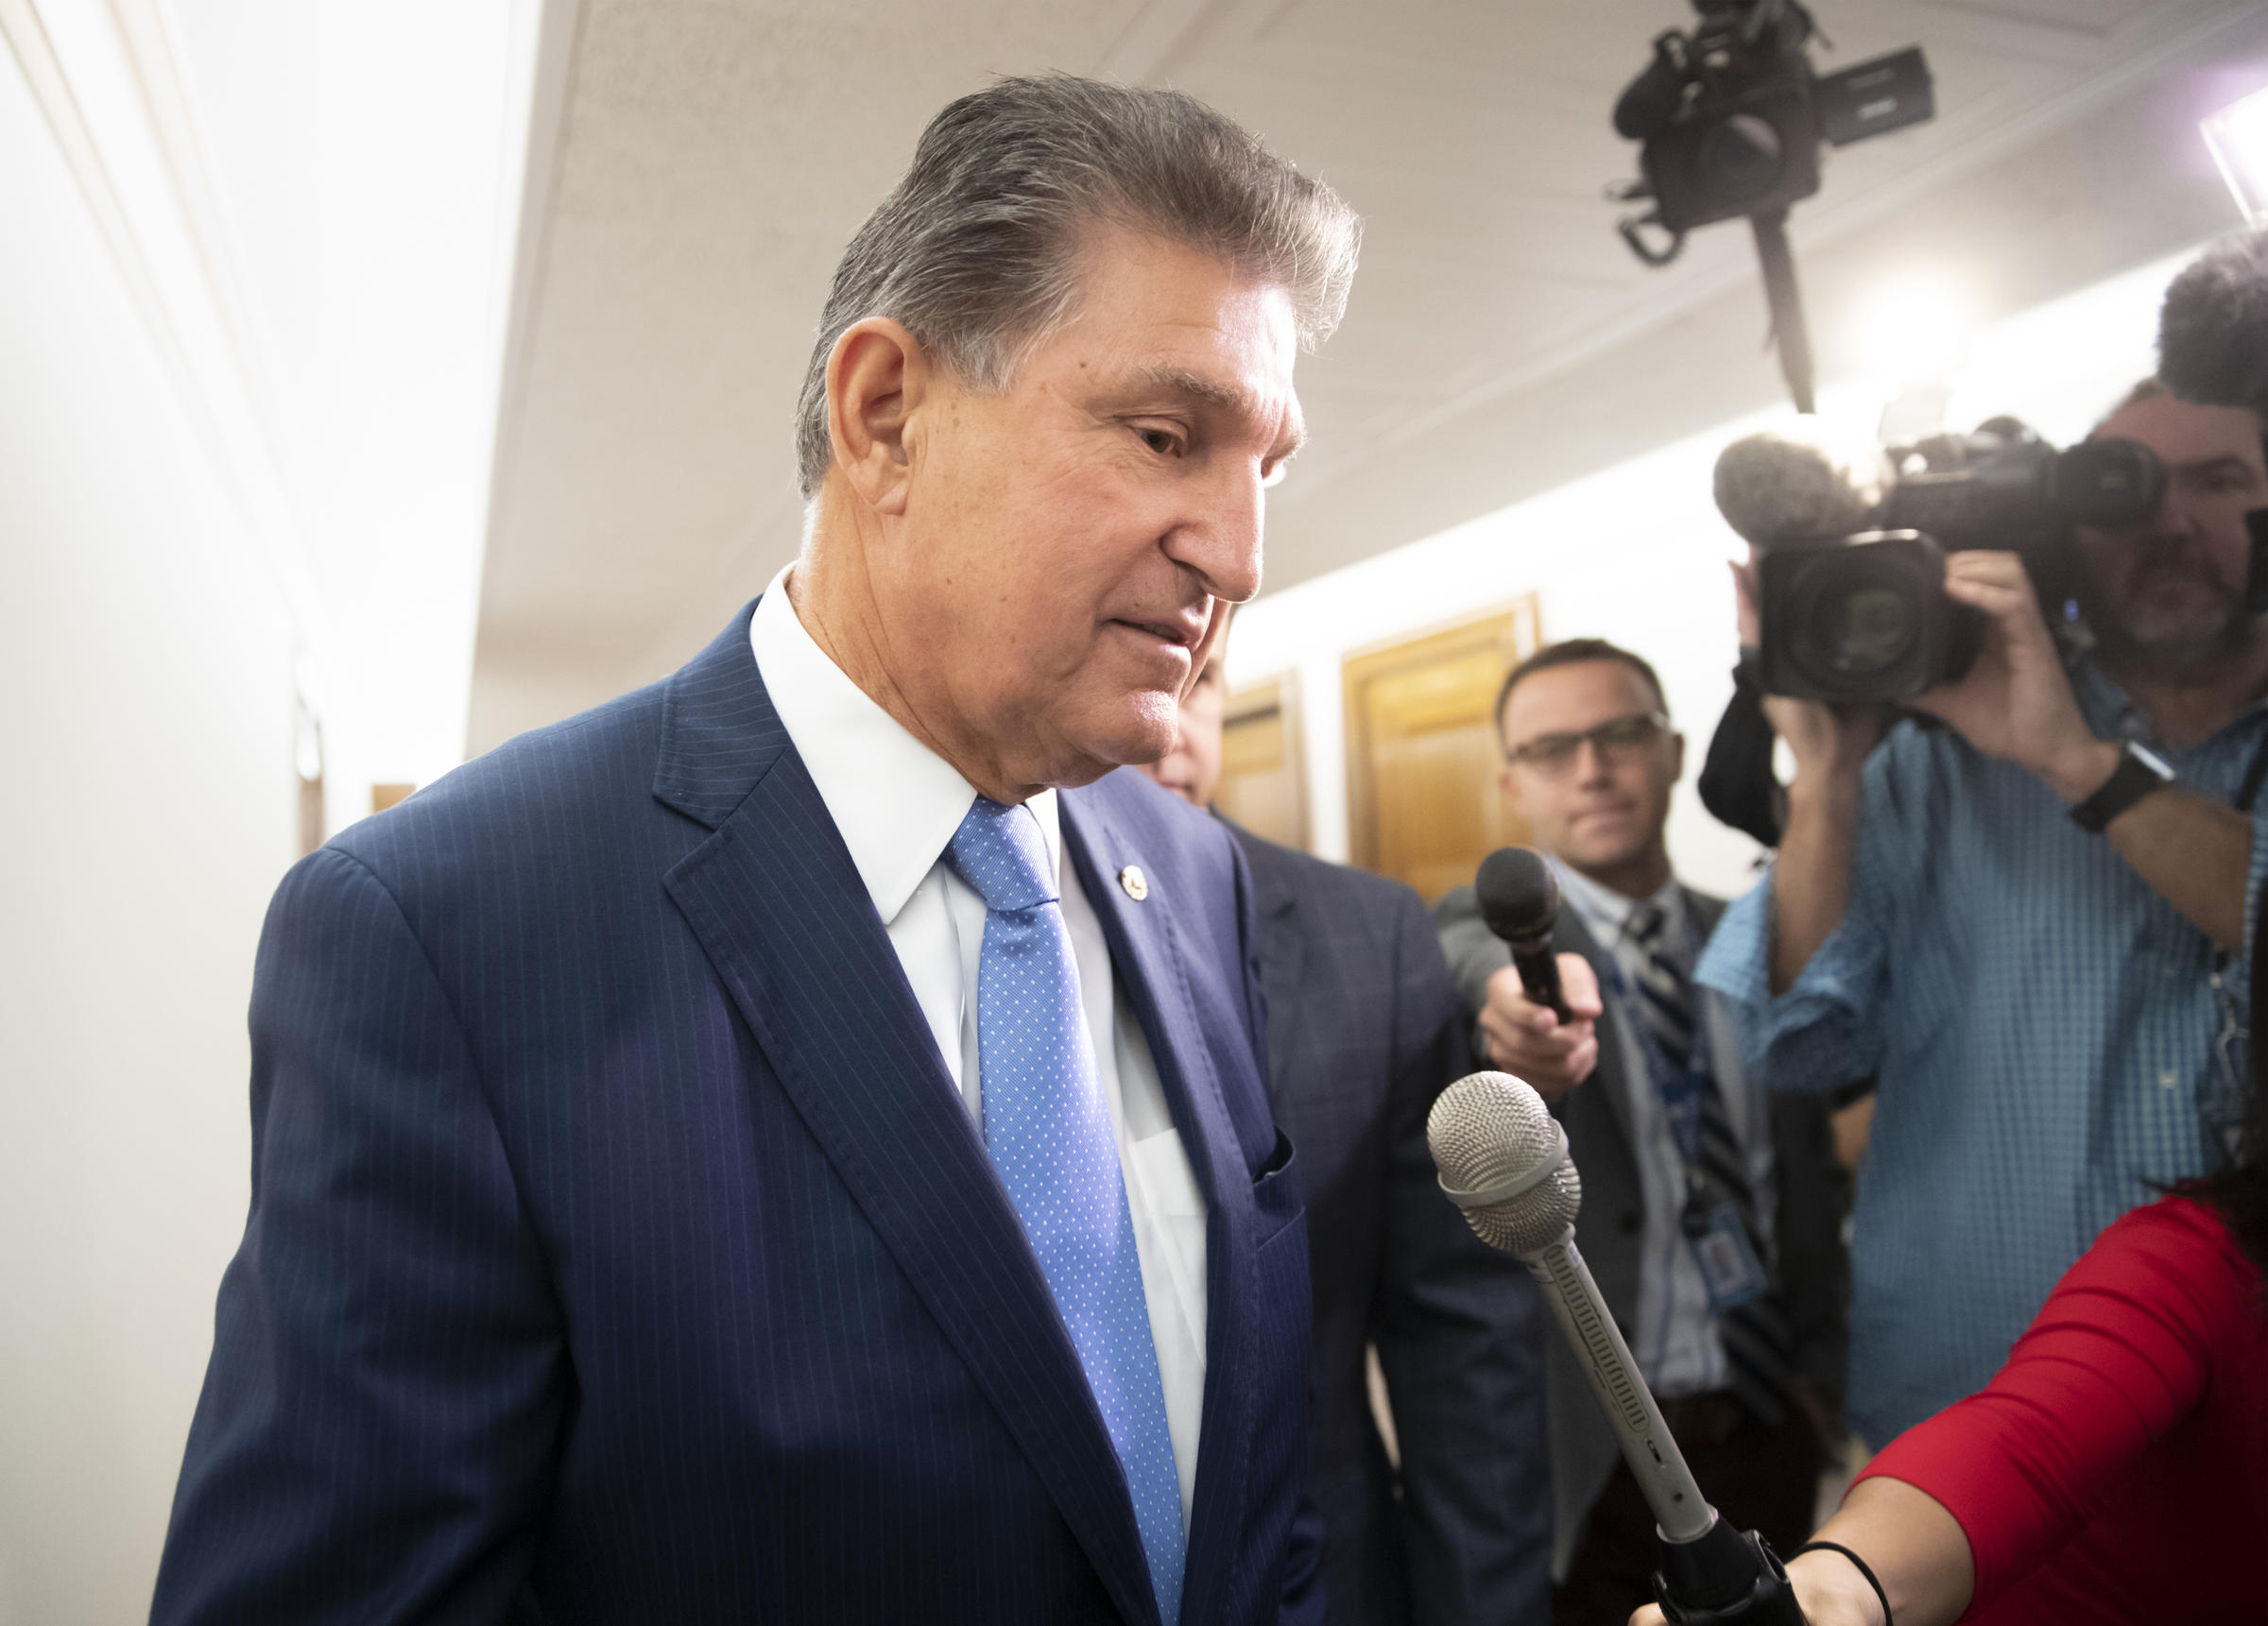 Manchin Supports Fbi Investigation Into Sexual Assault Allegations Against Kavanaugh West